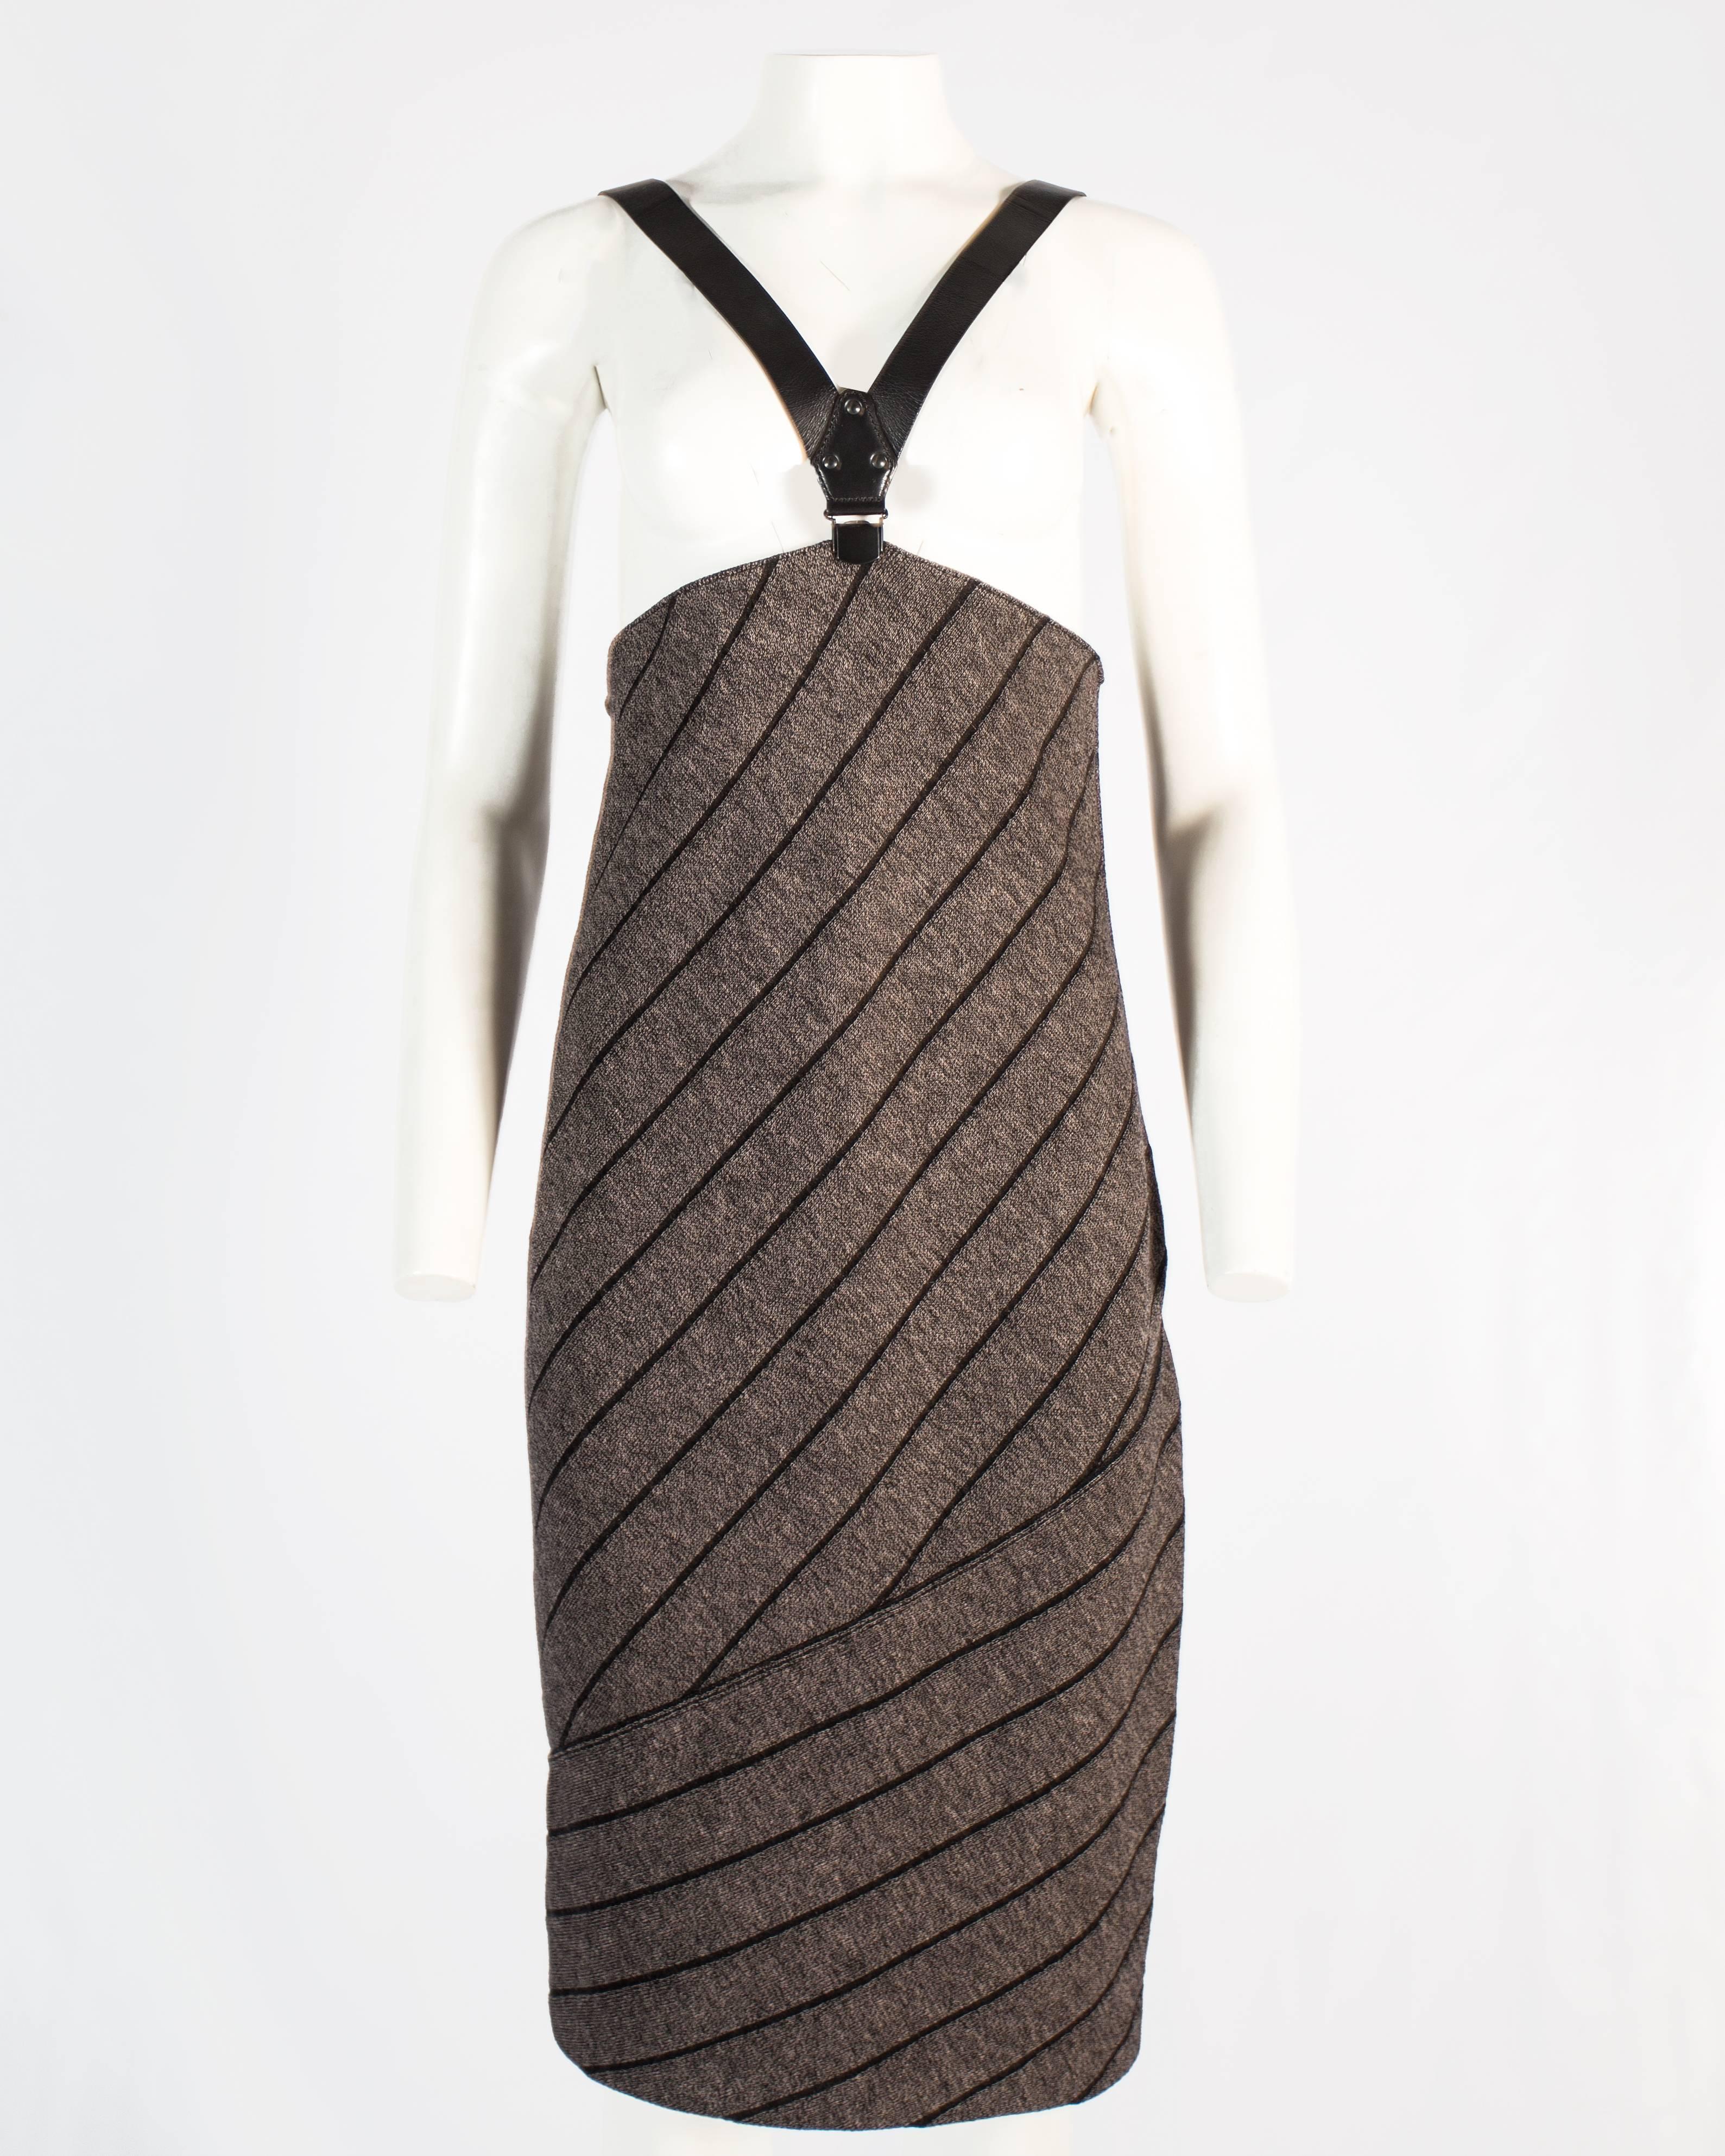 Black Azzedine Alaia knitted wool pencil skirt with black leather harness, a / w 1987